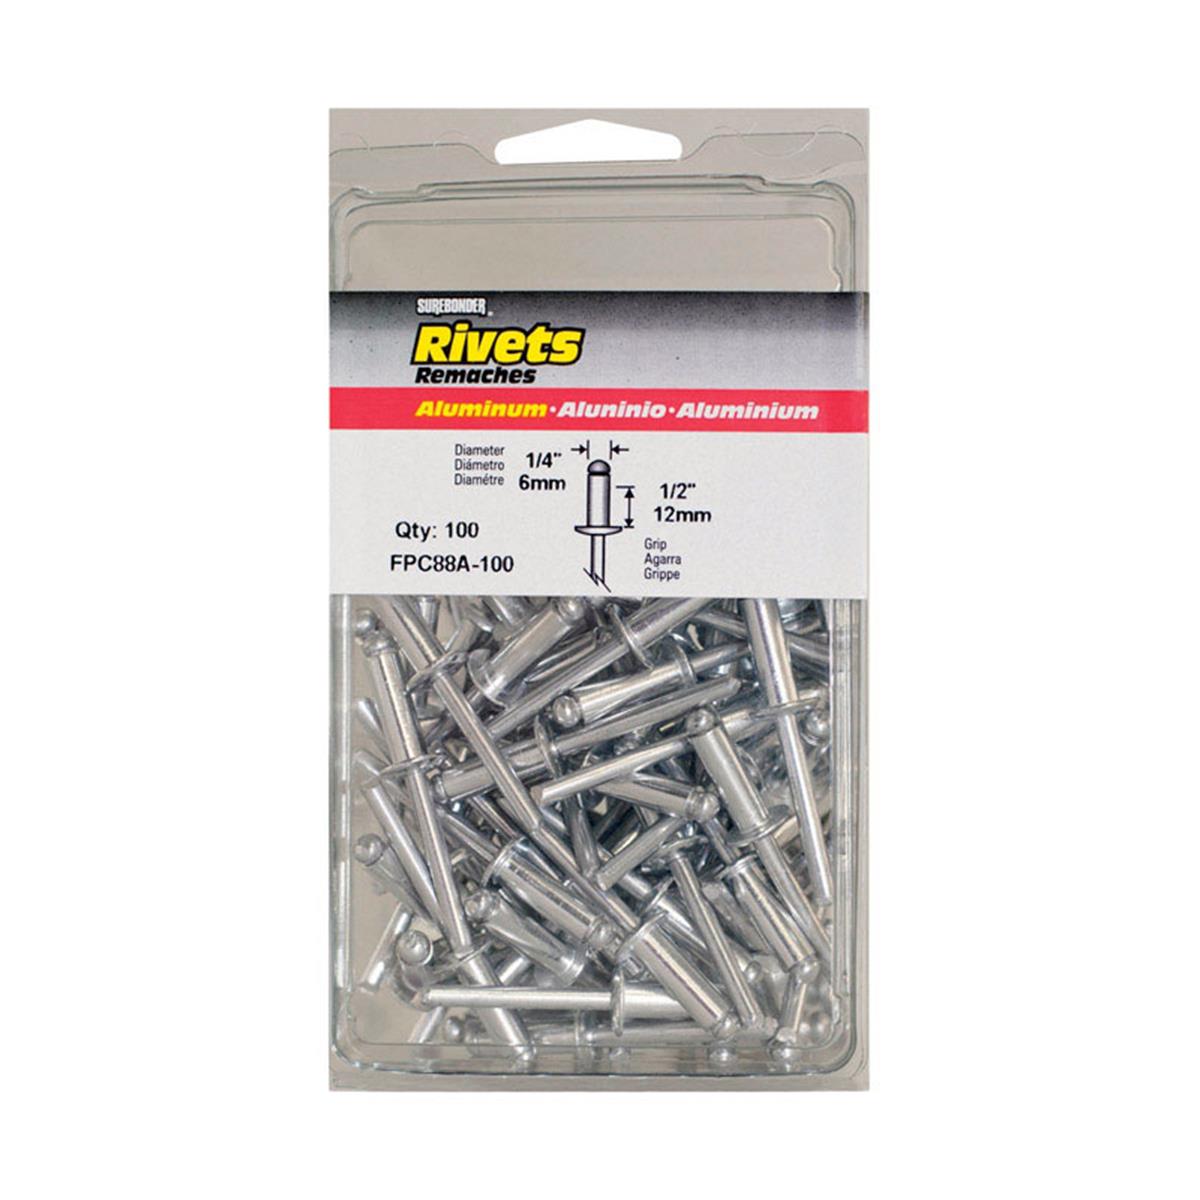 Fpc Fpc88a-100 0.25 X 0.5 In. Rivets Aluminum Long - 100 Pack